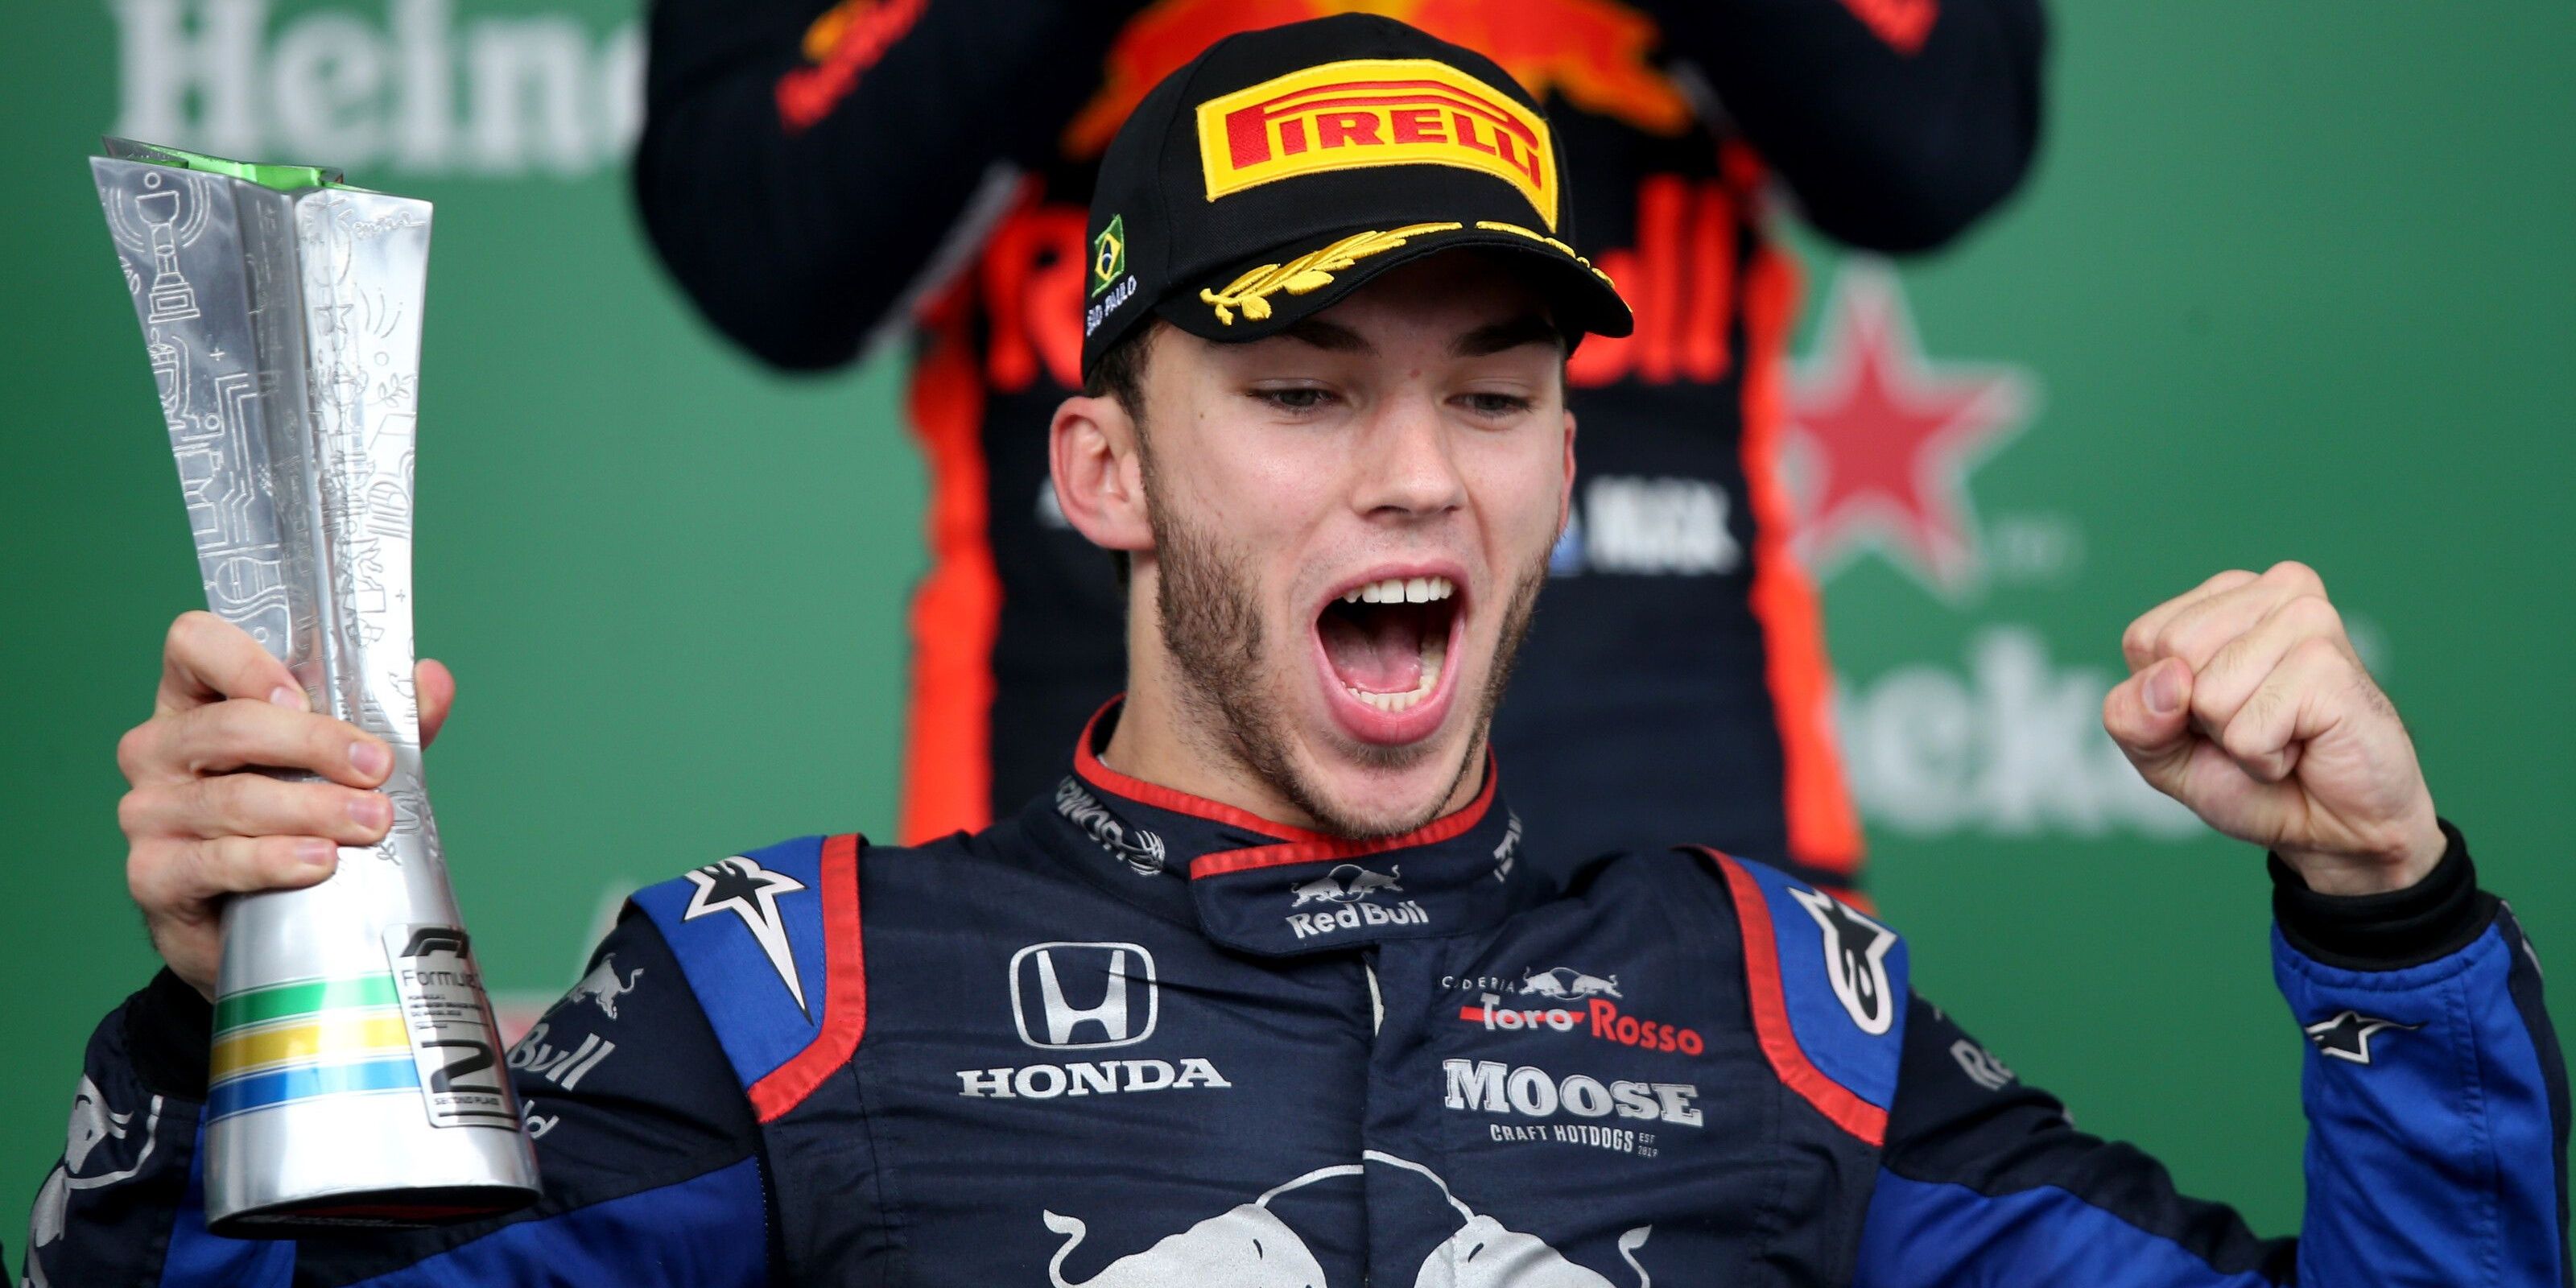 Gasly in Formula 1 Drive To Survive